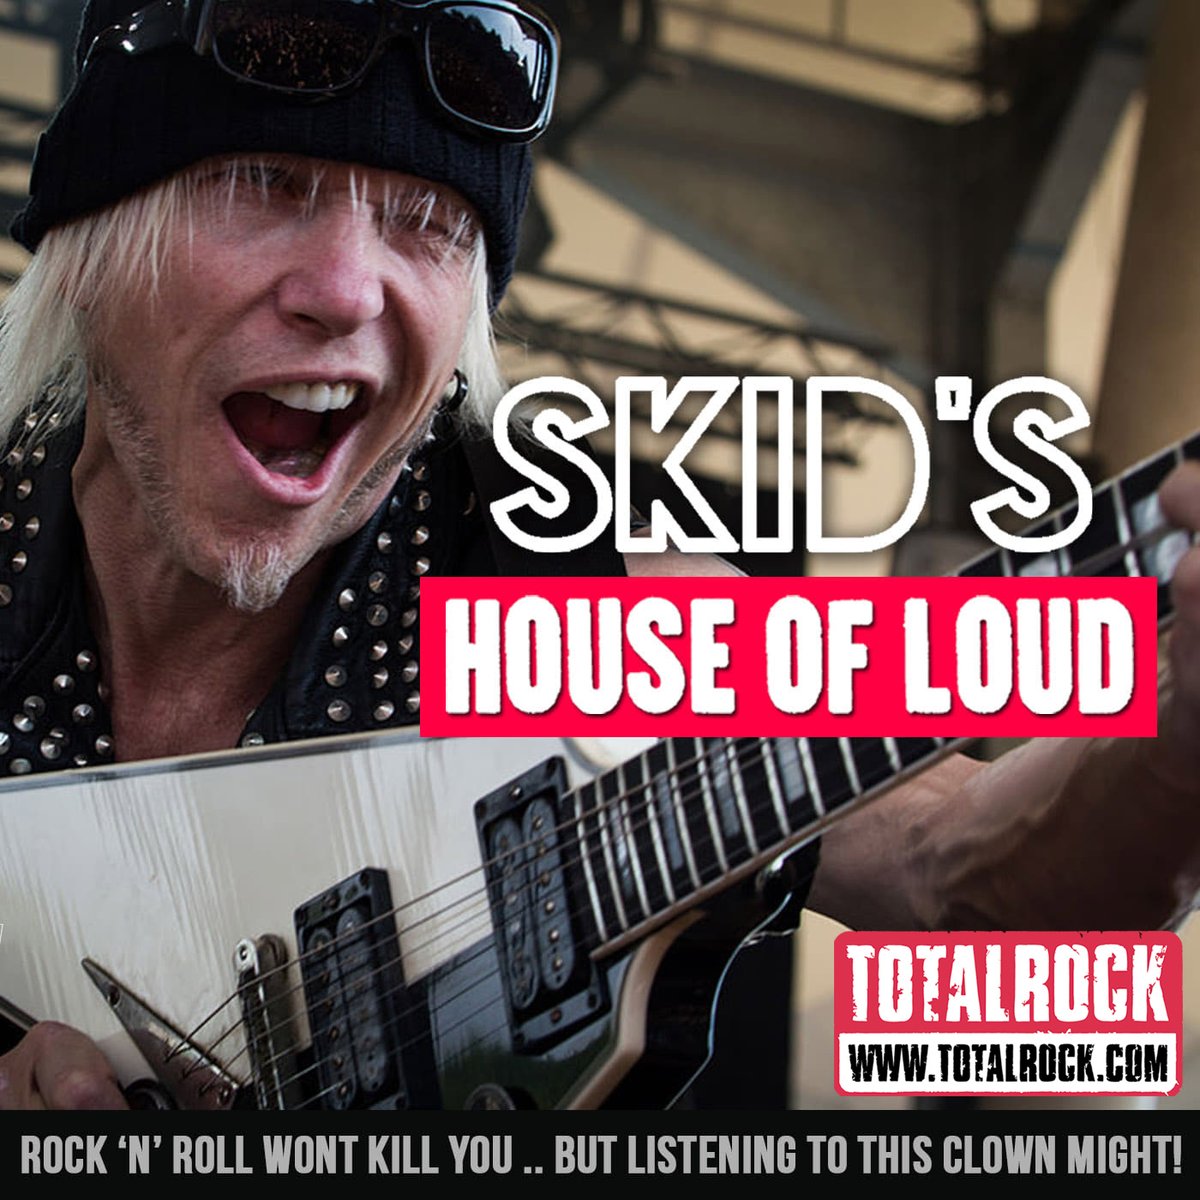 1/2 Missed the latest #SHOL on @TotalRockOnline ? click mixcloud.com/TotalRockOffic… to hear again music from @avalanchebandrock @Gpistoleros @nevertelUS @i_musicc @RecklessLoveCom @tompetty @whileshesleeps @reckonercult @janesaddiction @korythewords + much more! #Totalrock